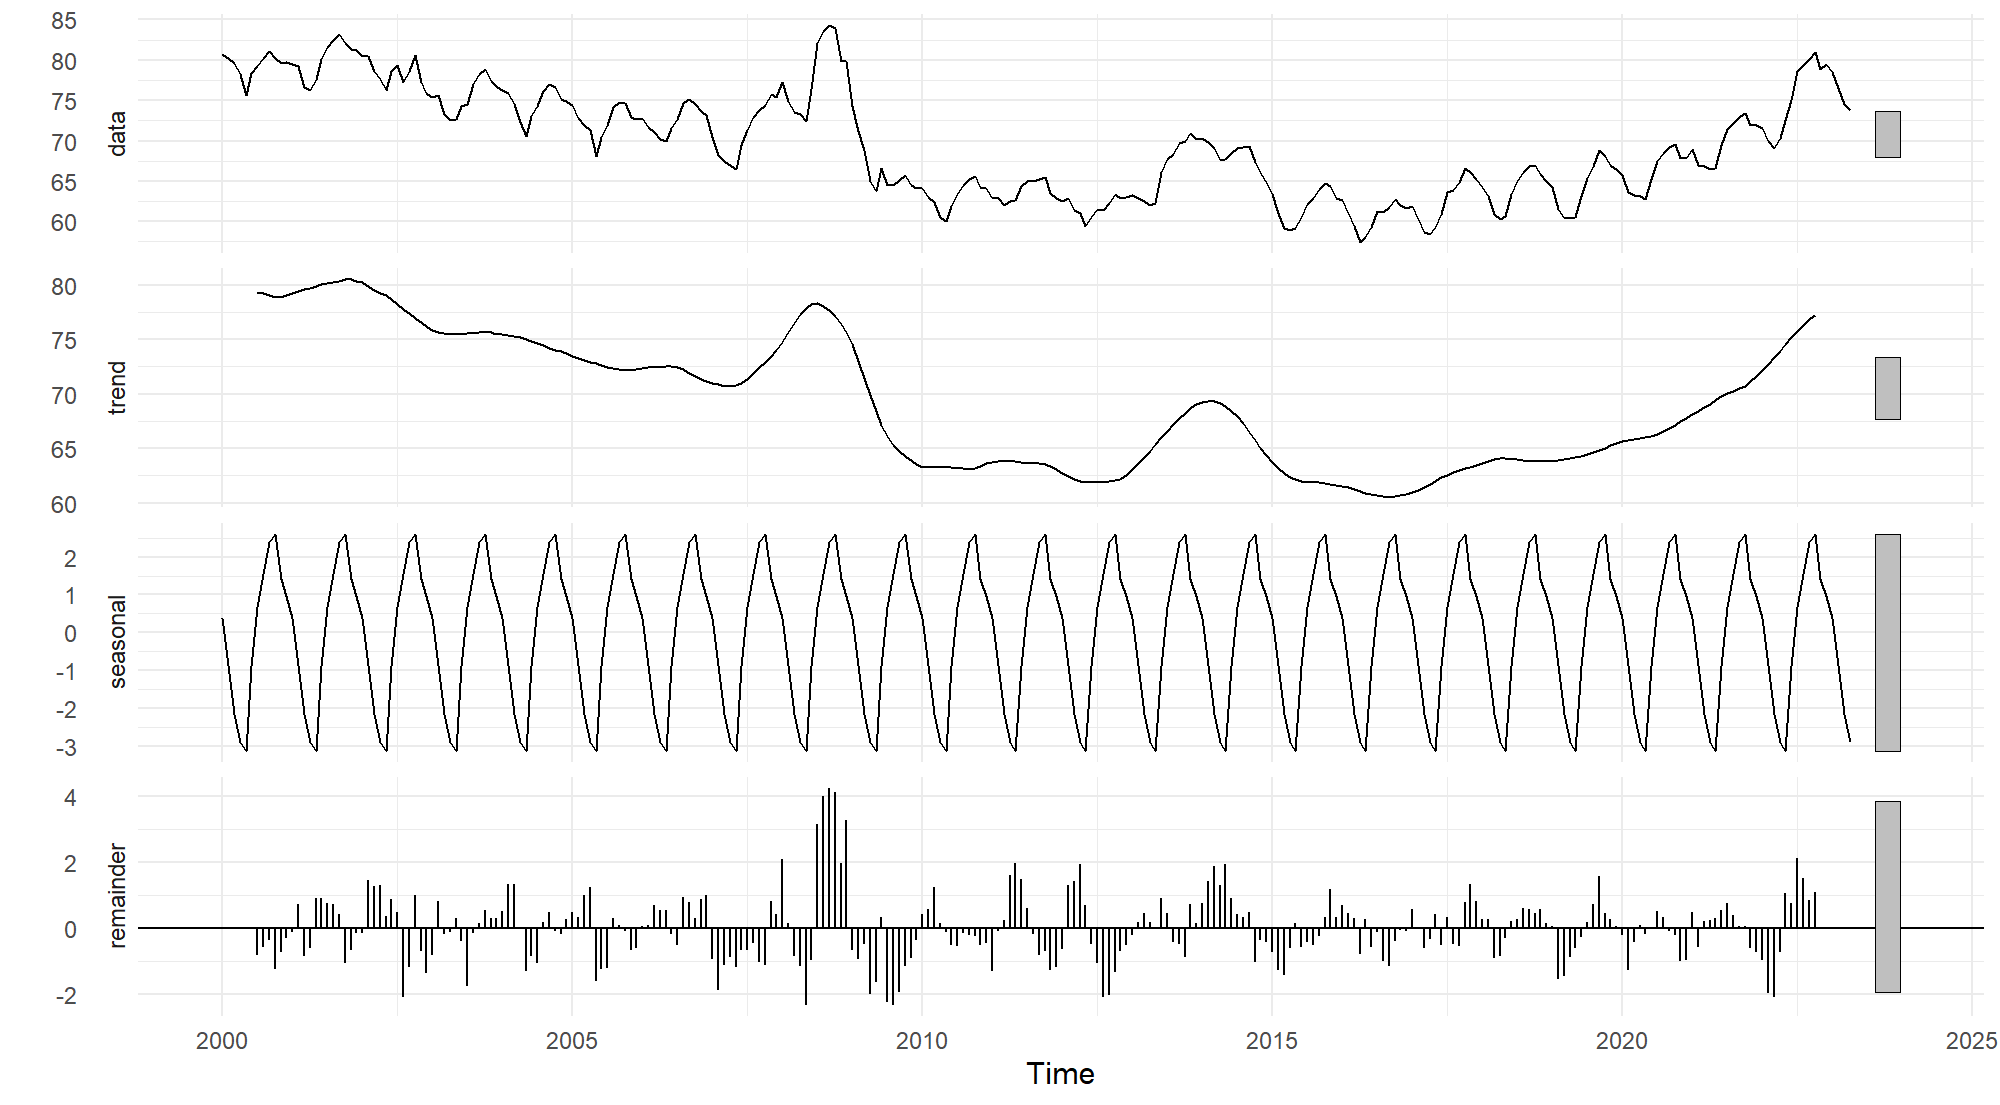 Figure 3: Example of a seasonal decomposition plot for CH_Milchpreis. The milk price is decomposed into a trend (via a moving average), a seasonal effect and the remainder. The bars on the right indicate the relative magnitude of the effects.